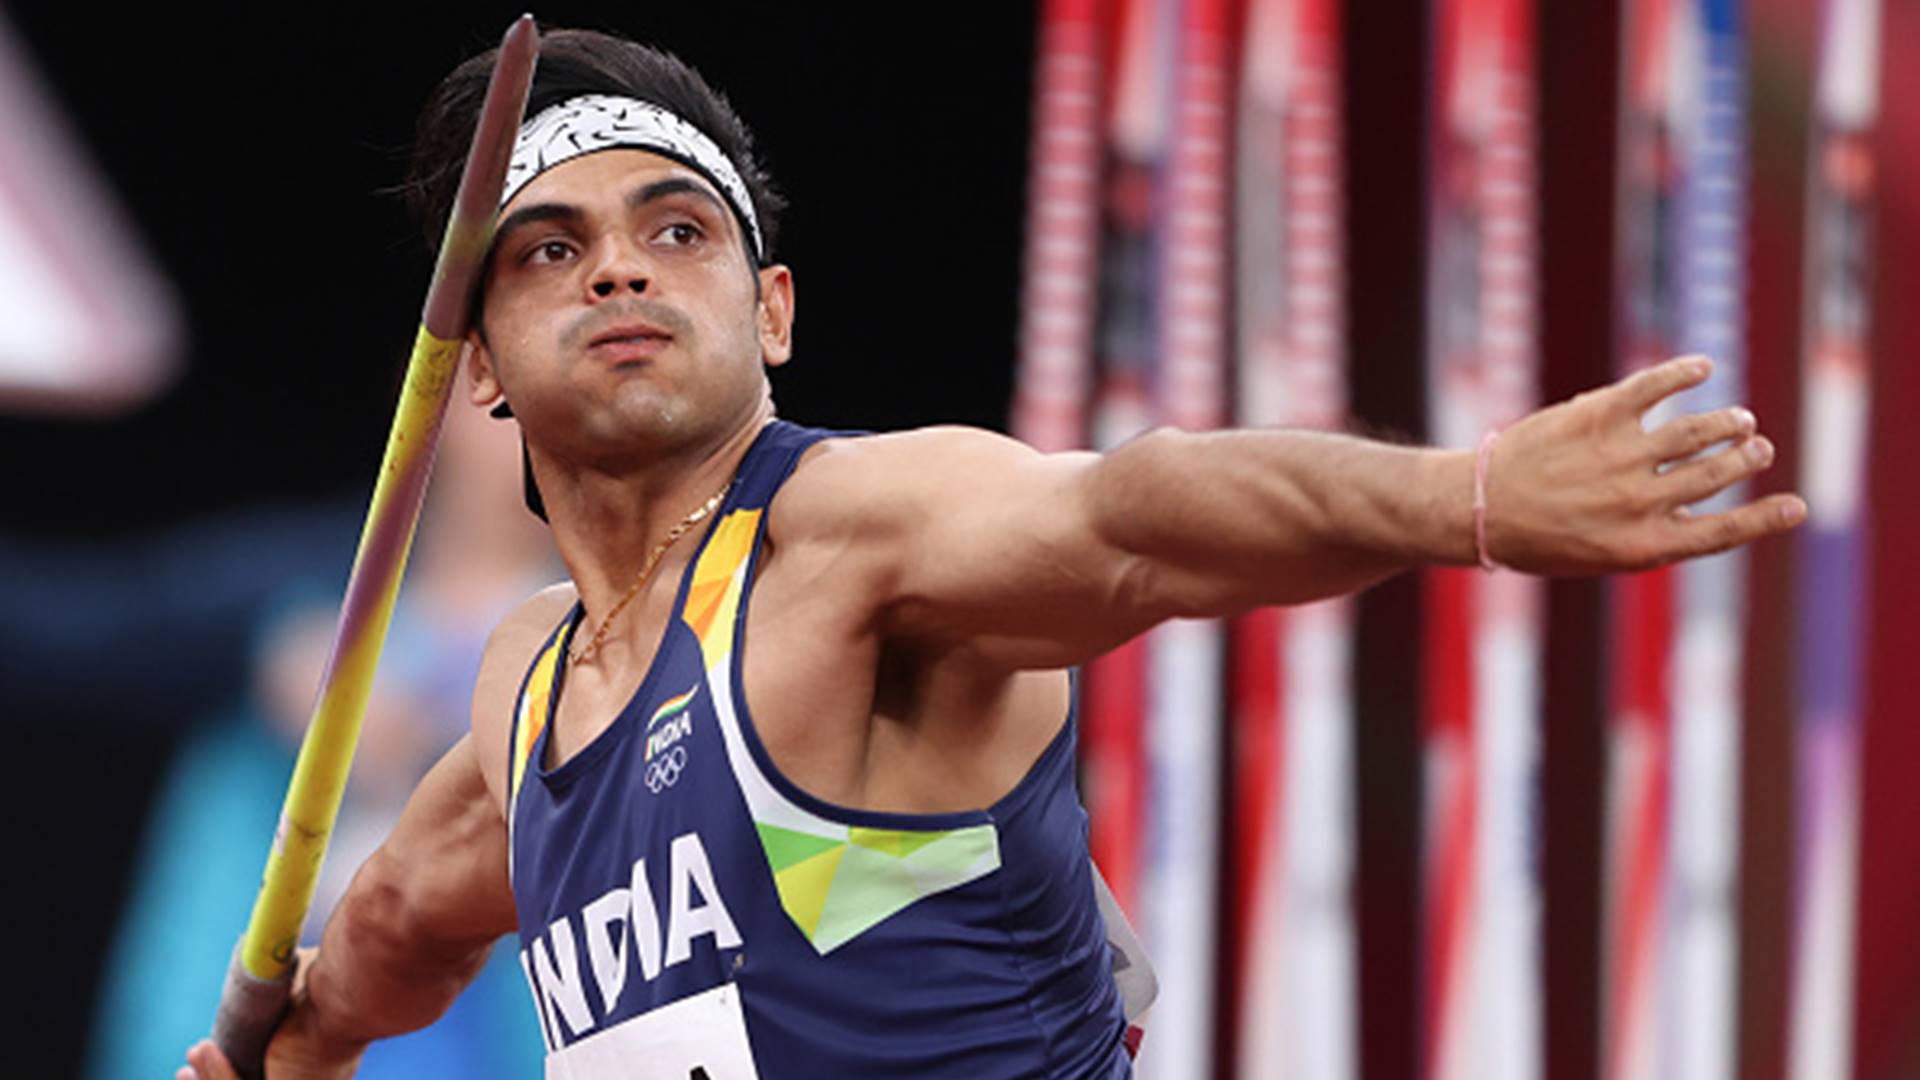 neeraj chopra breaks national record with 89.30m throw in his first game since tokyo olympics